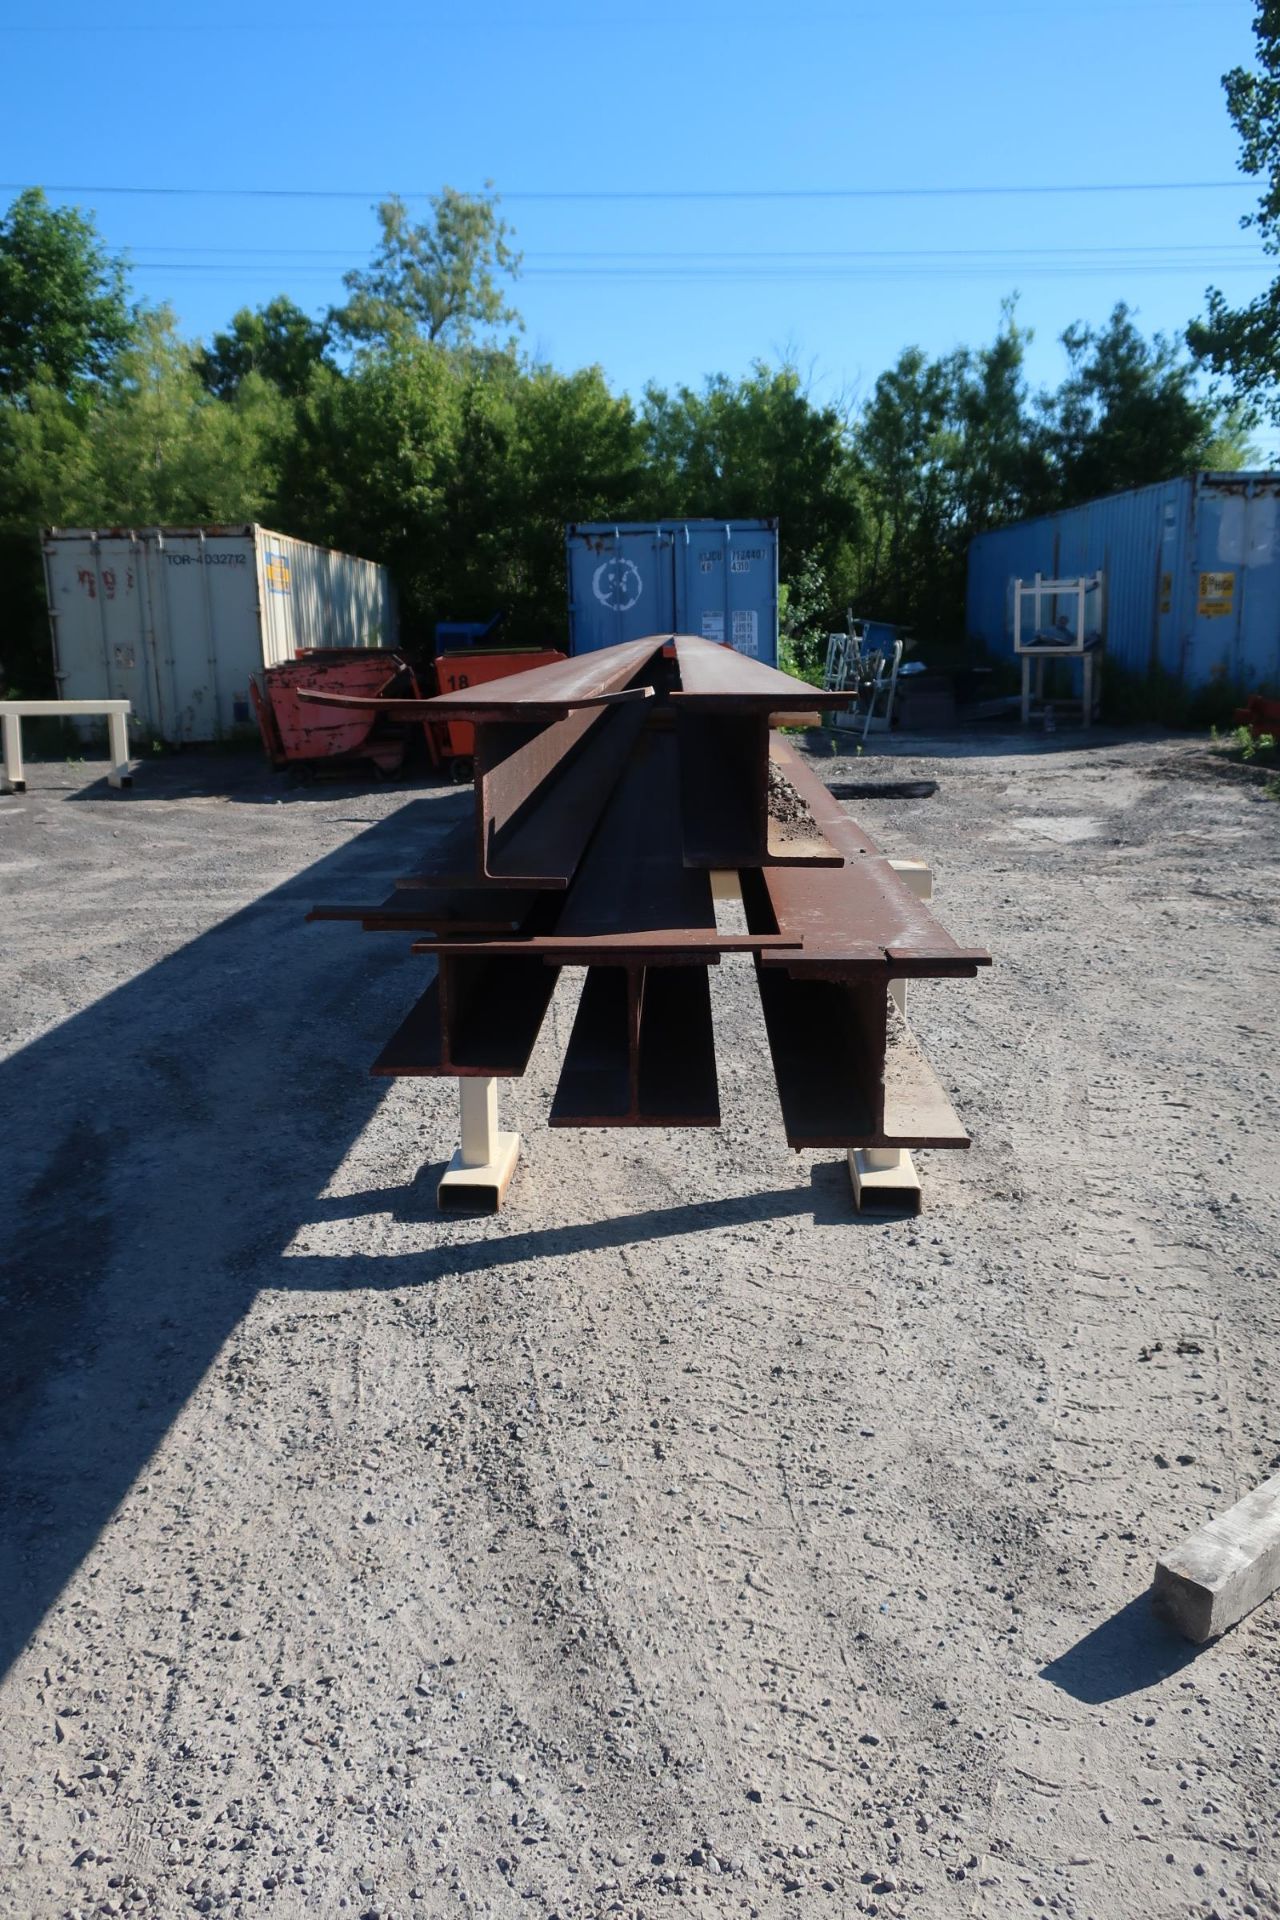 Lot of 5 (5 beams total) 40' Long each - 200' total - 8x8" - 1/2" flange, 3/8" web - Image 2 of 2